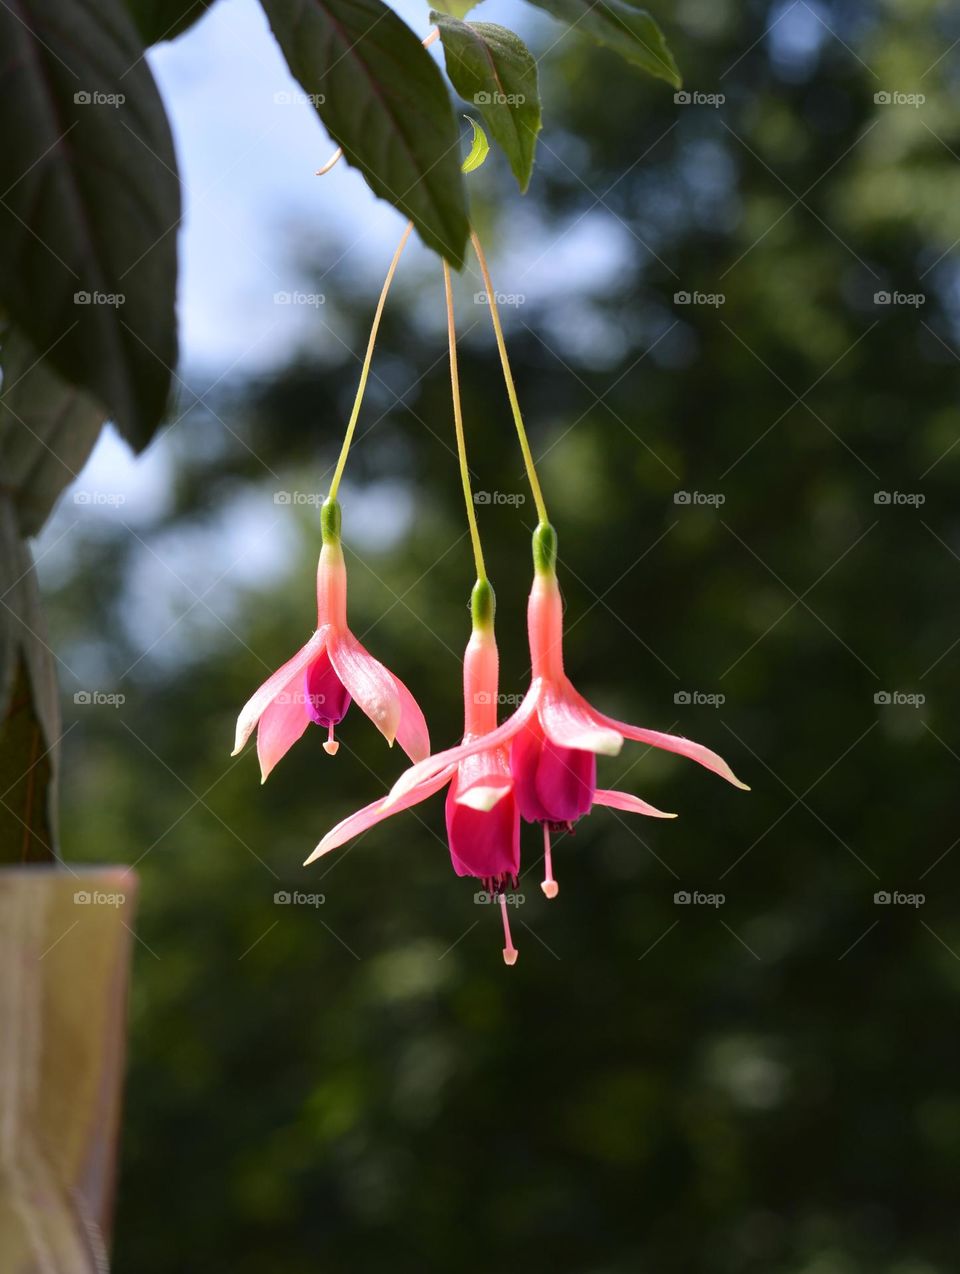 very nice pink flowers house plants spring blooming in the sunlight green background